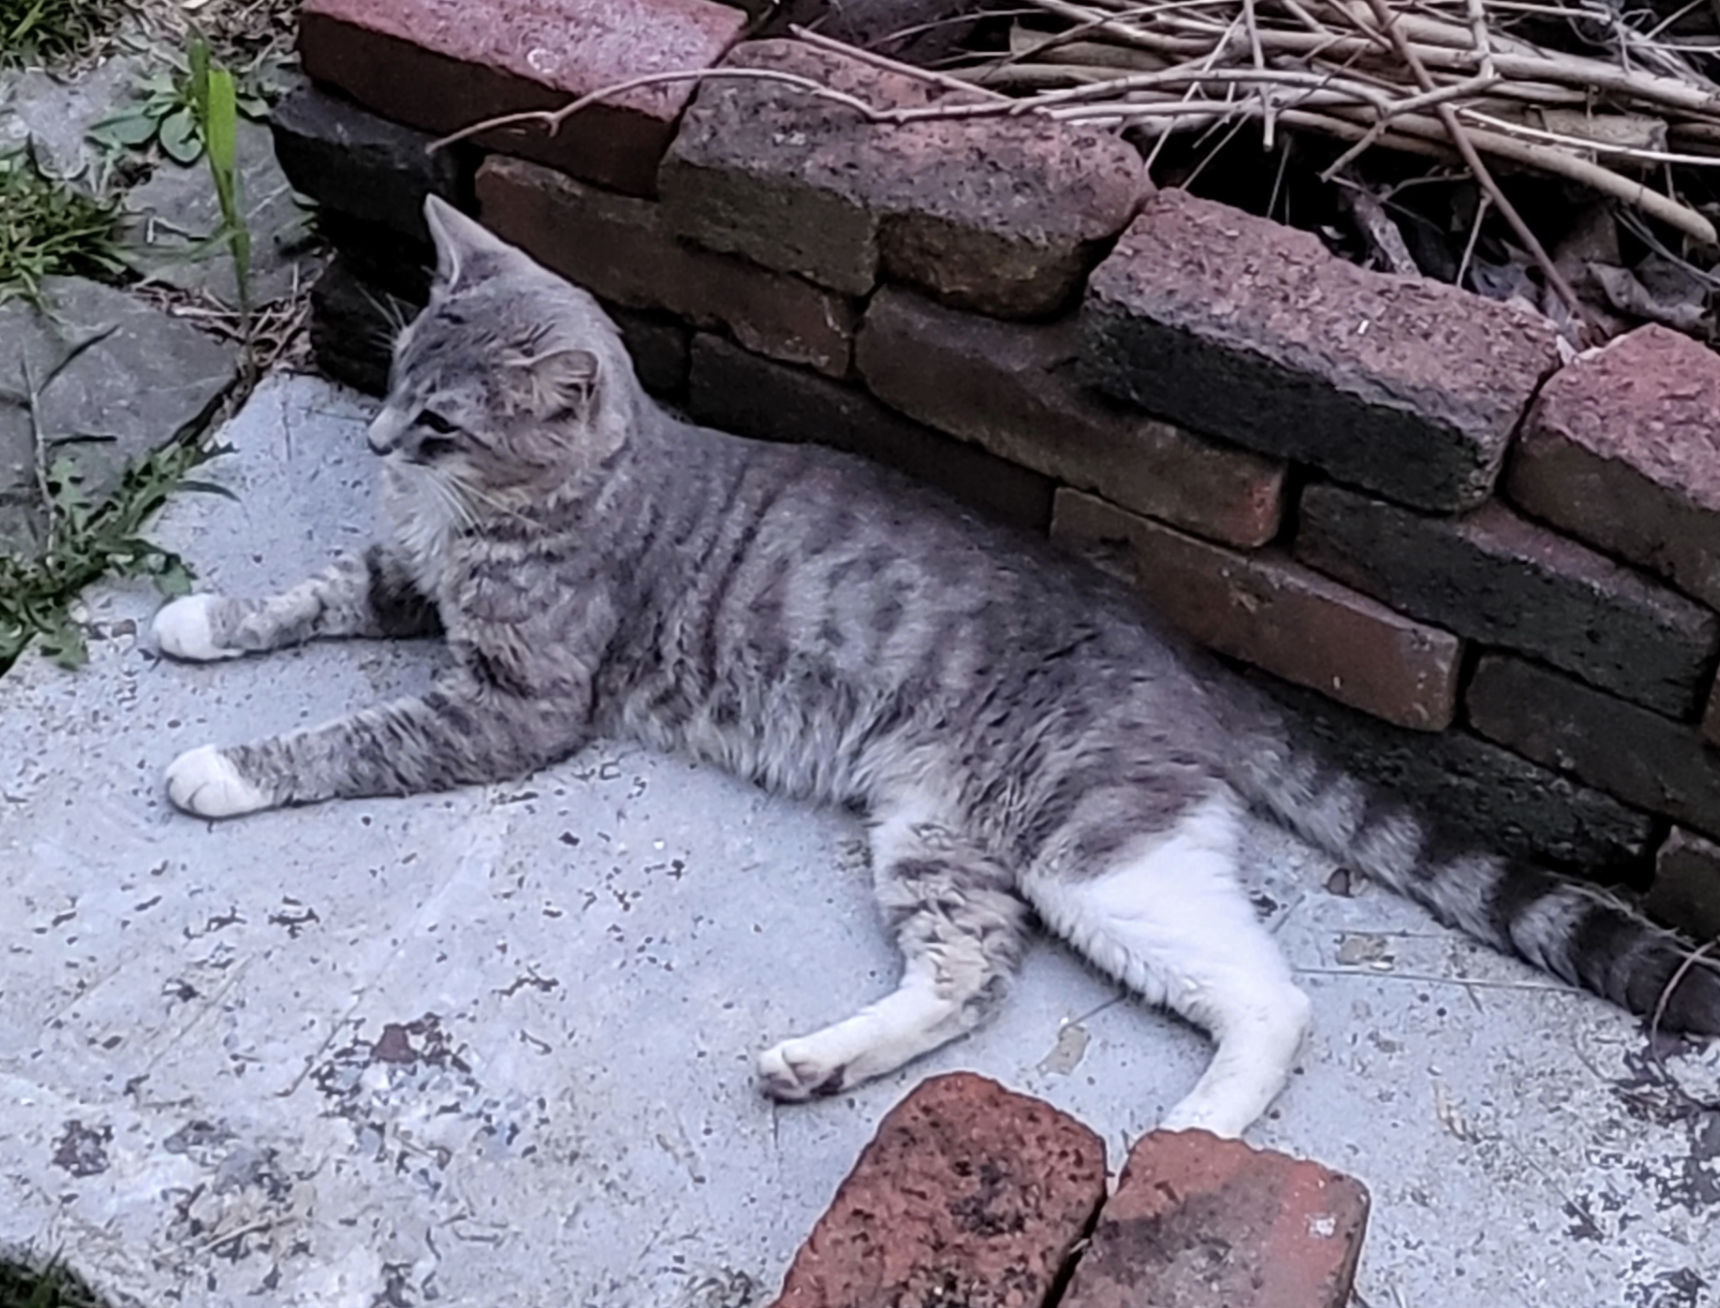 A gray-striped cat lounging by a brick ledge with twigs behind it